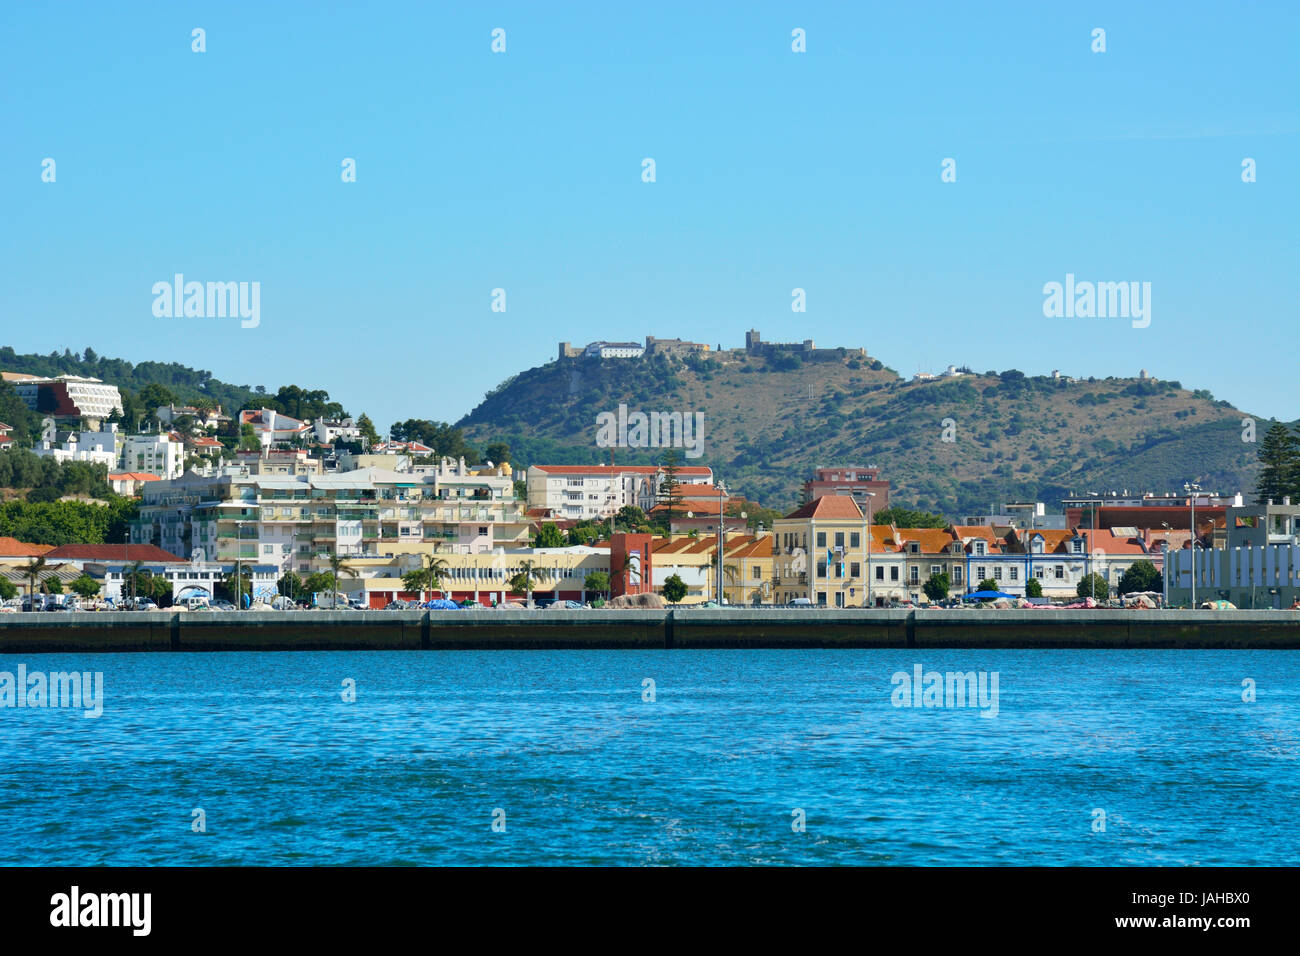 The city of Setúbal, by the Sado river, and Palmela castle on the horizon. Portugal Stock Photo